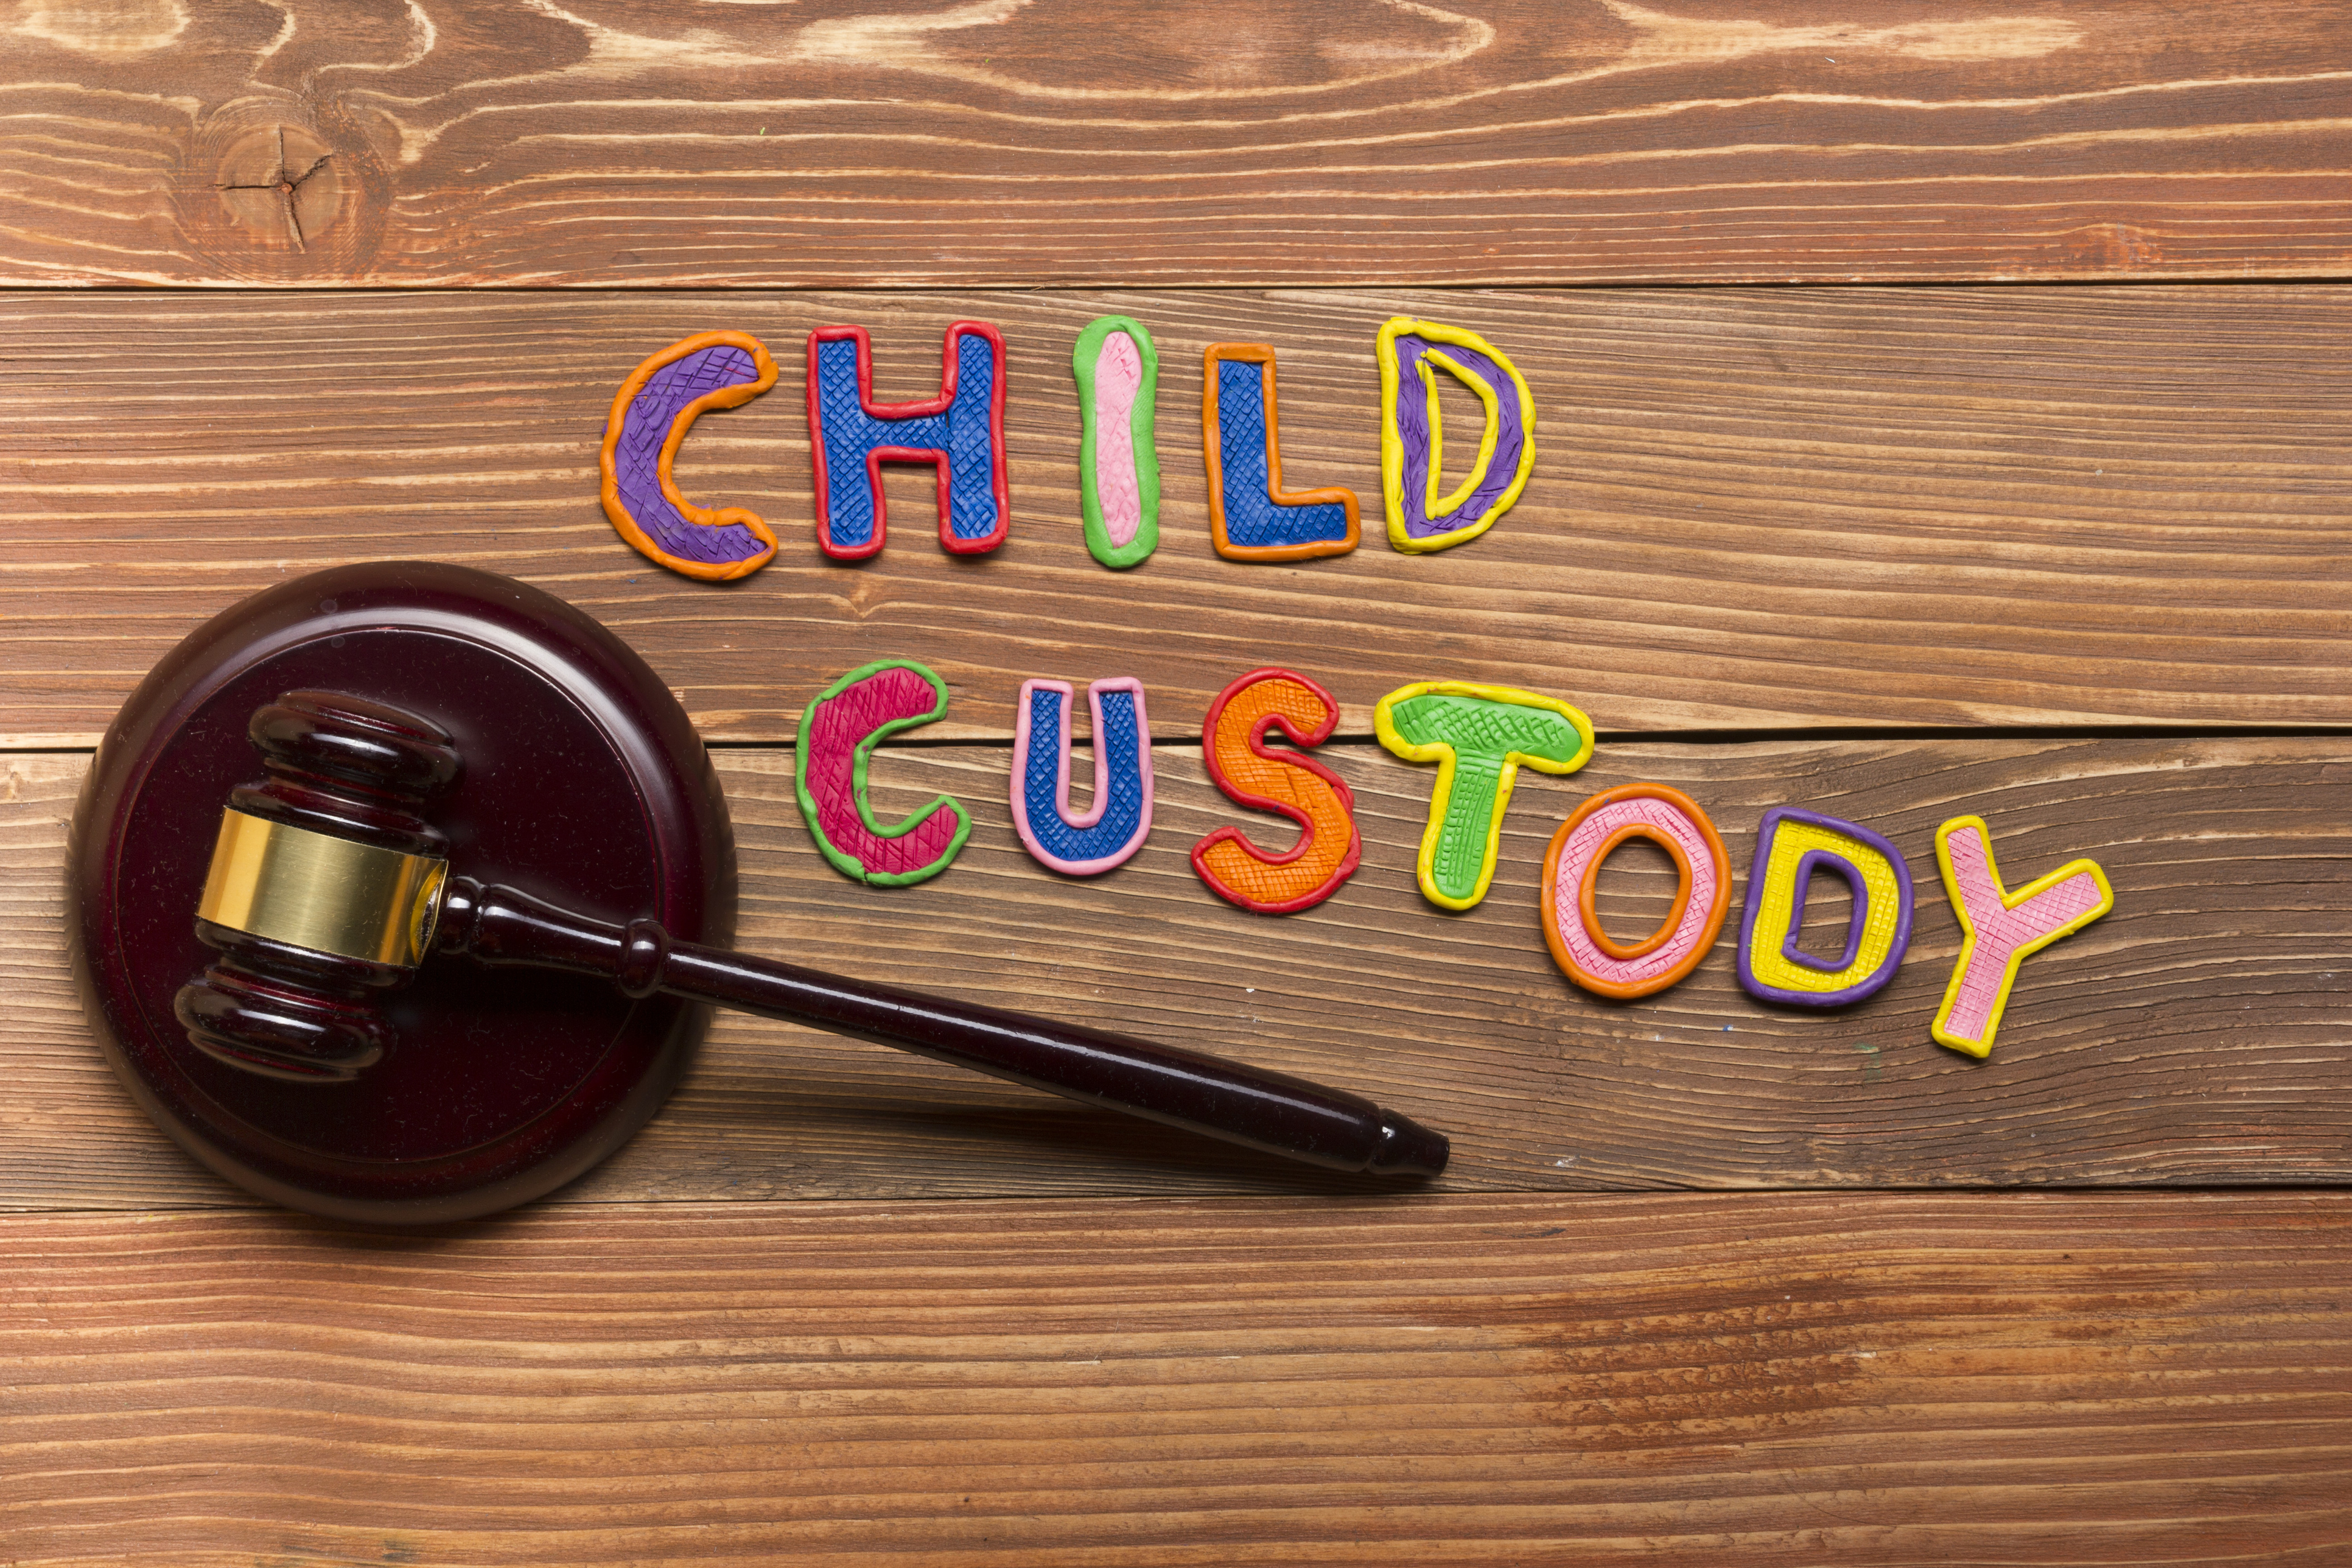 A gavel with the colorful words "child custody" spelled out next to it